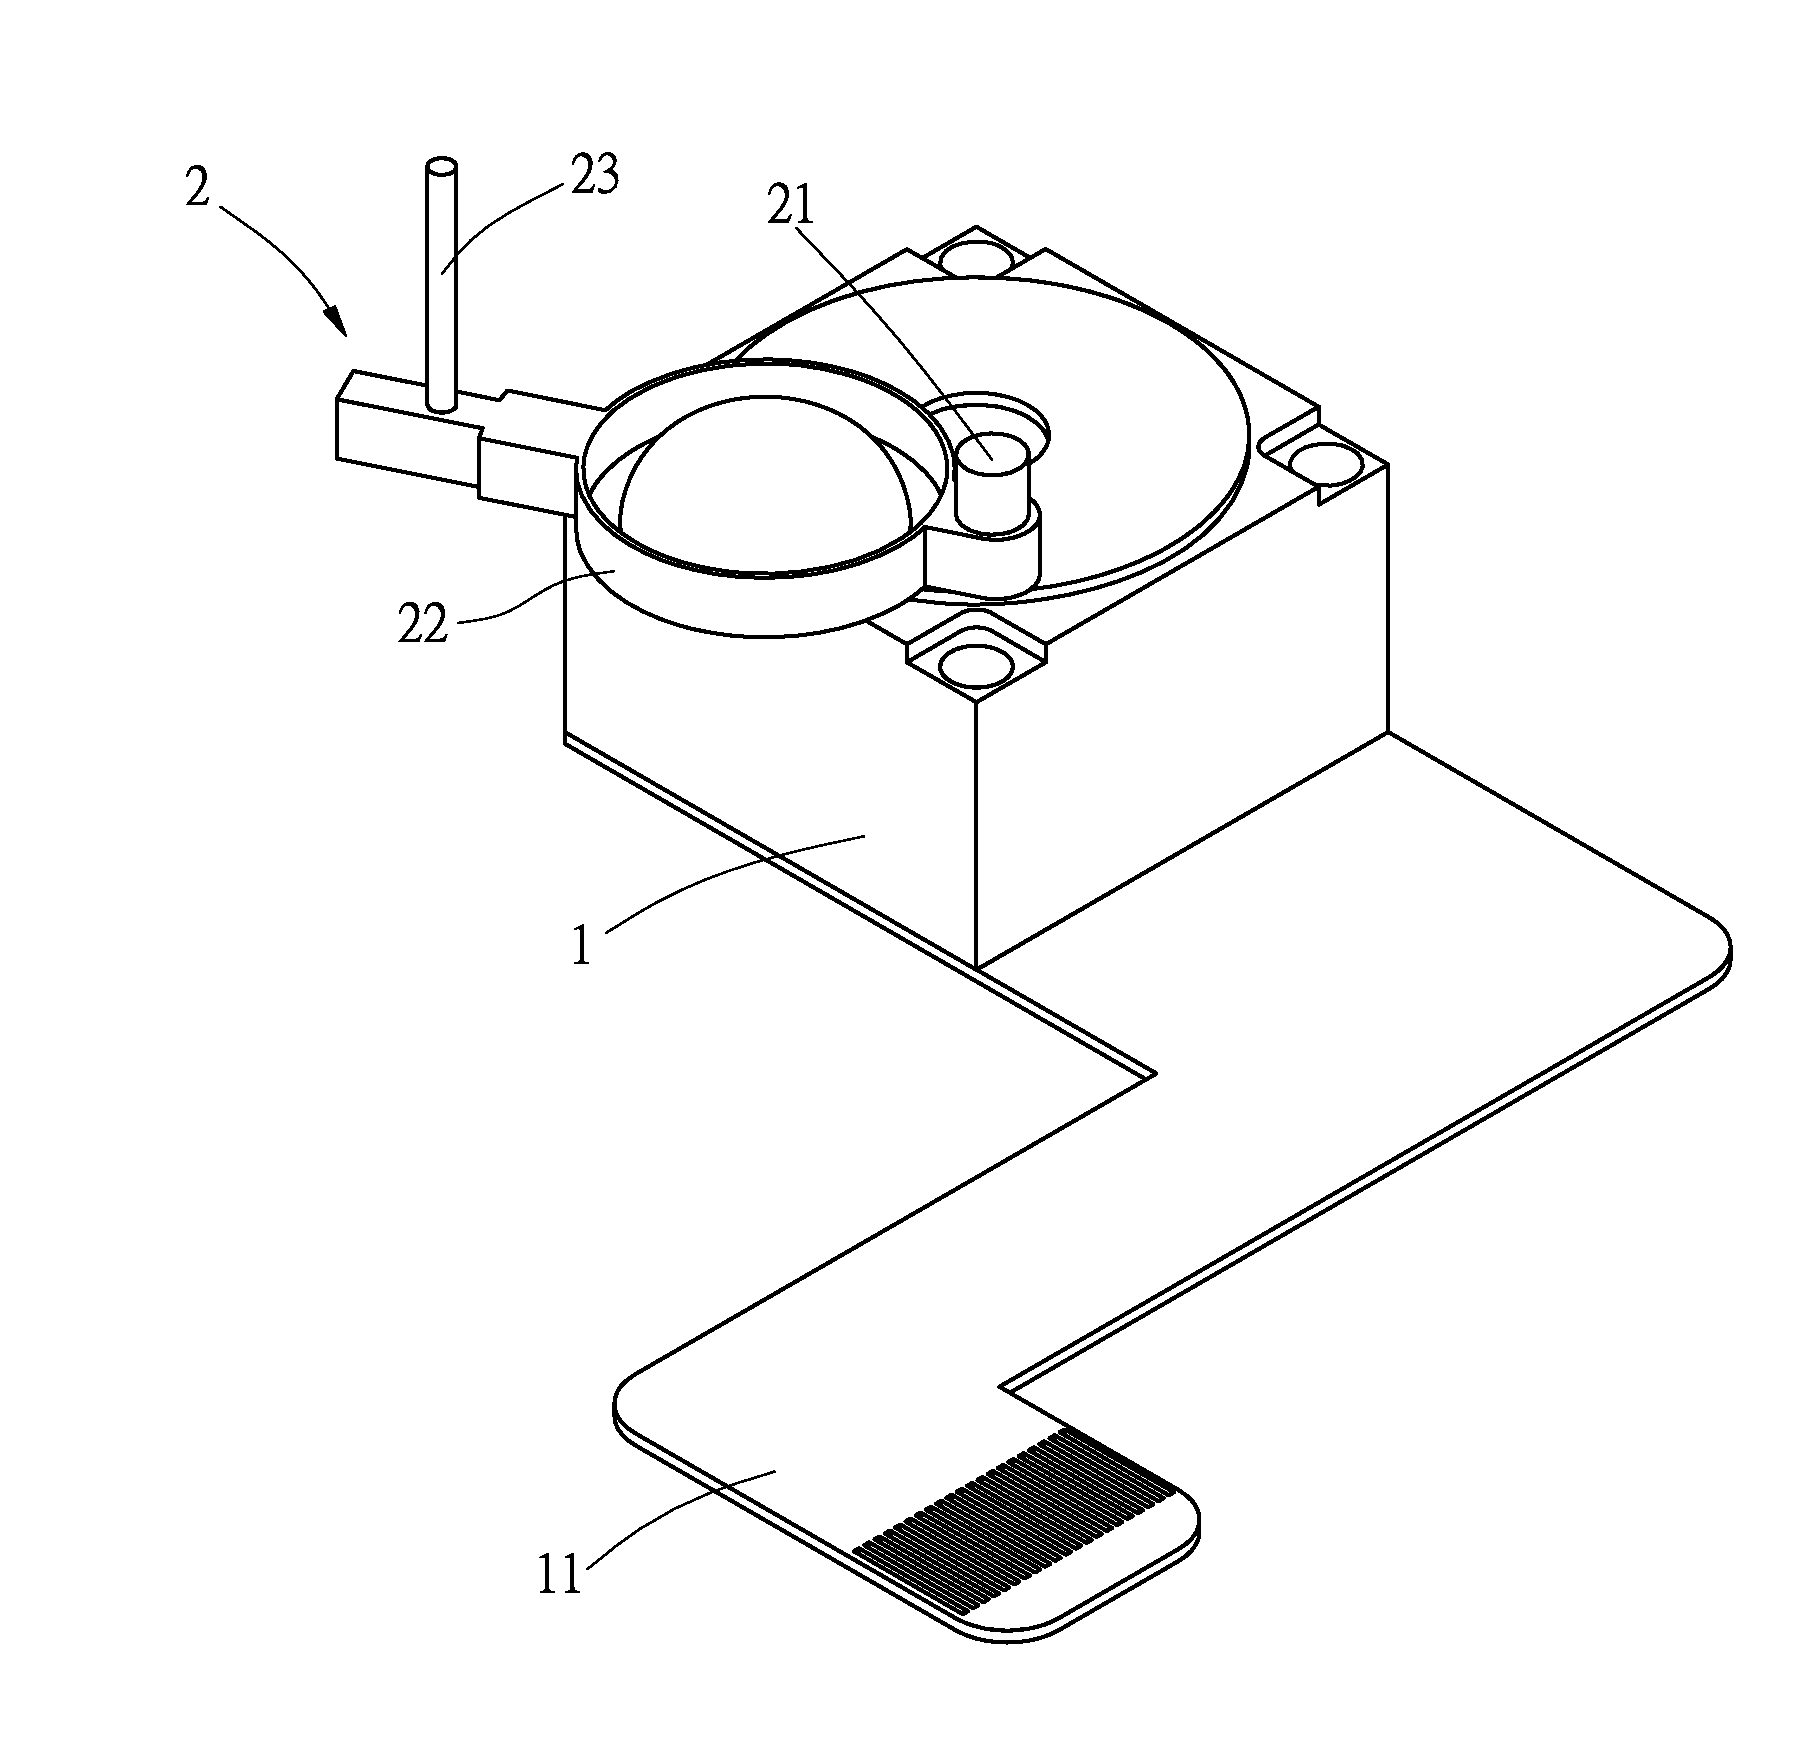 Adjustable and replaceable lens structure for portable electronic devices